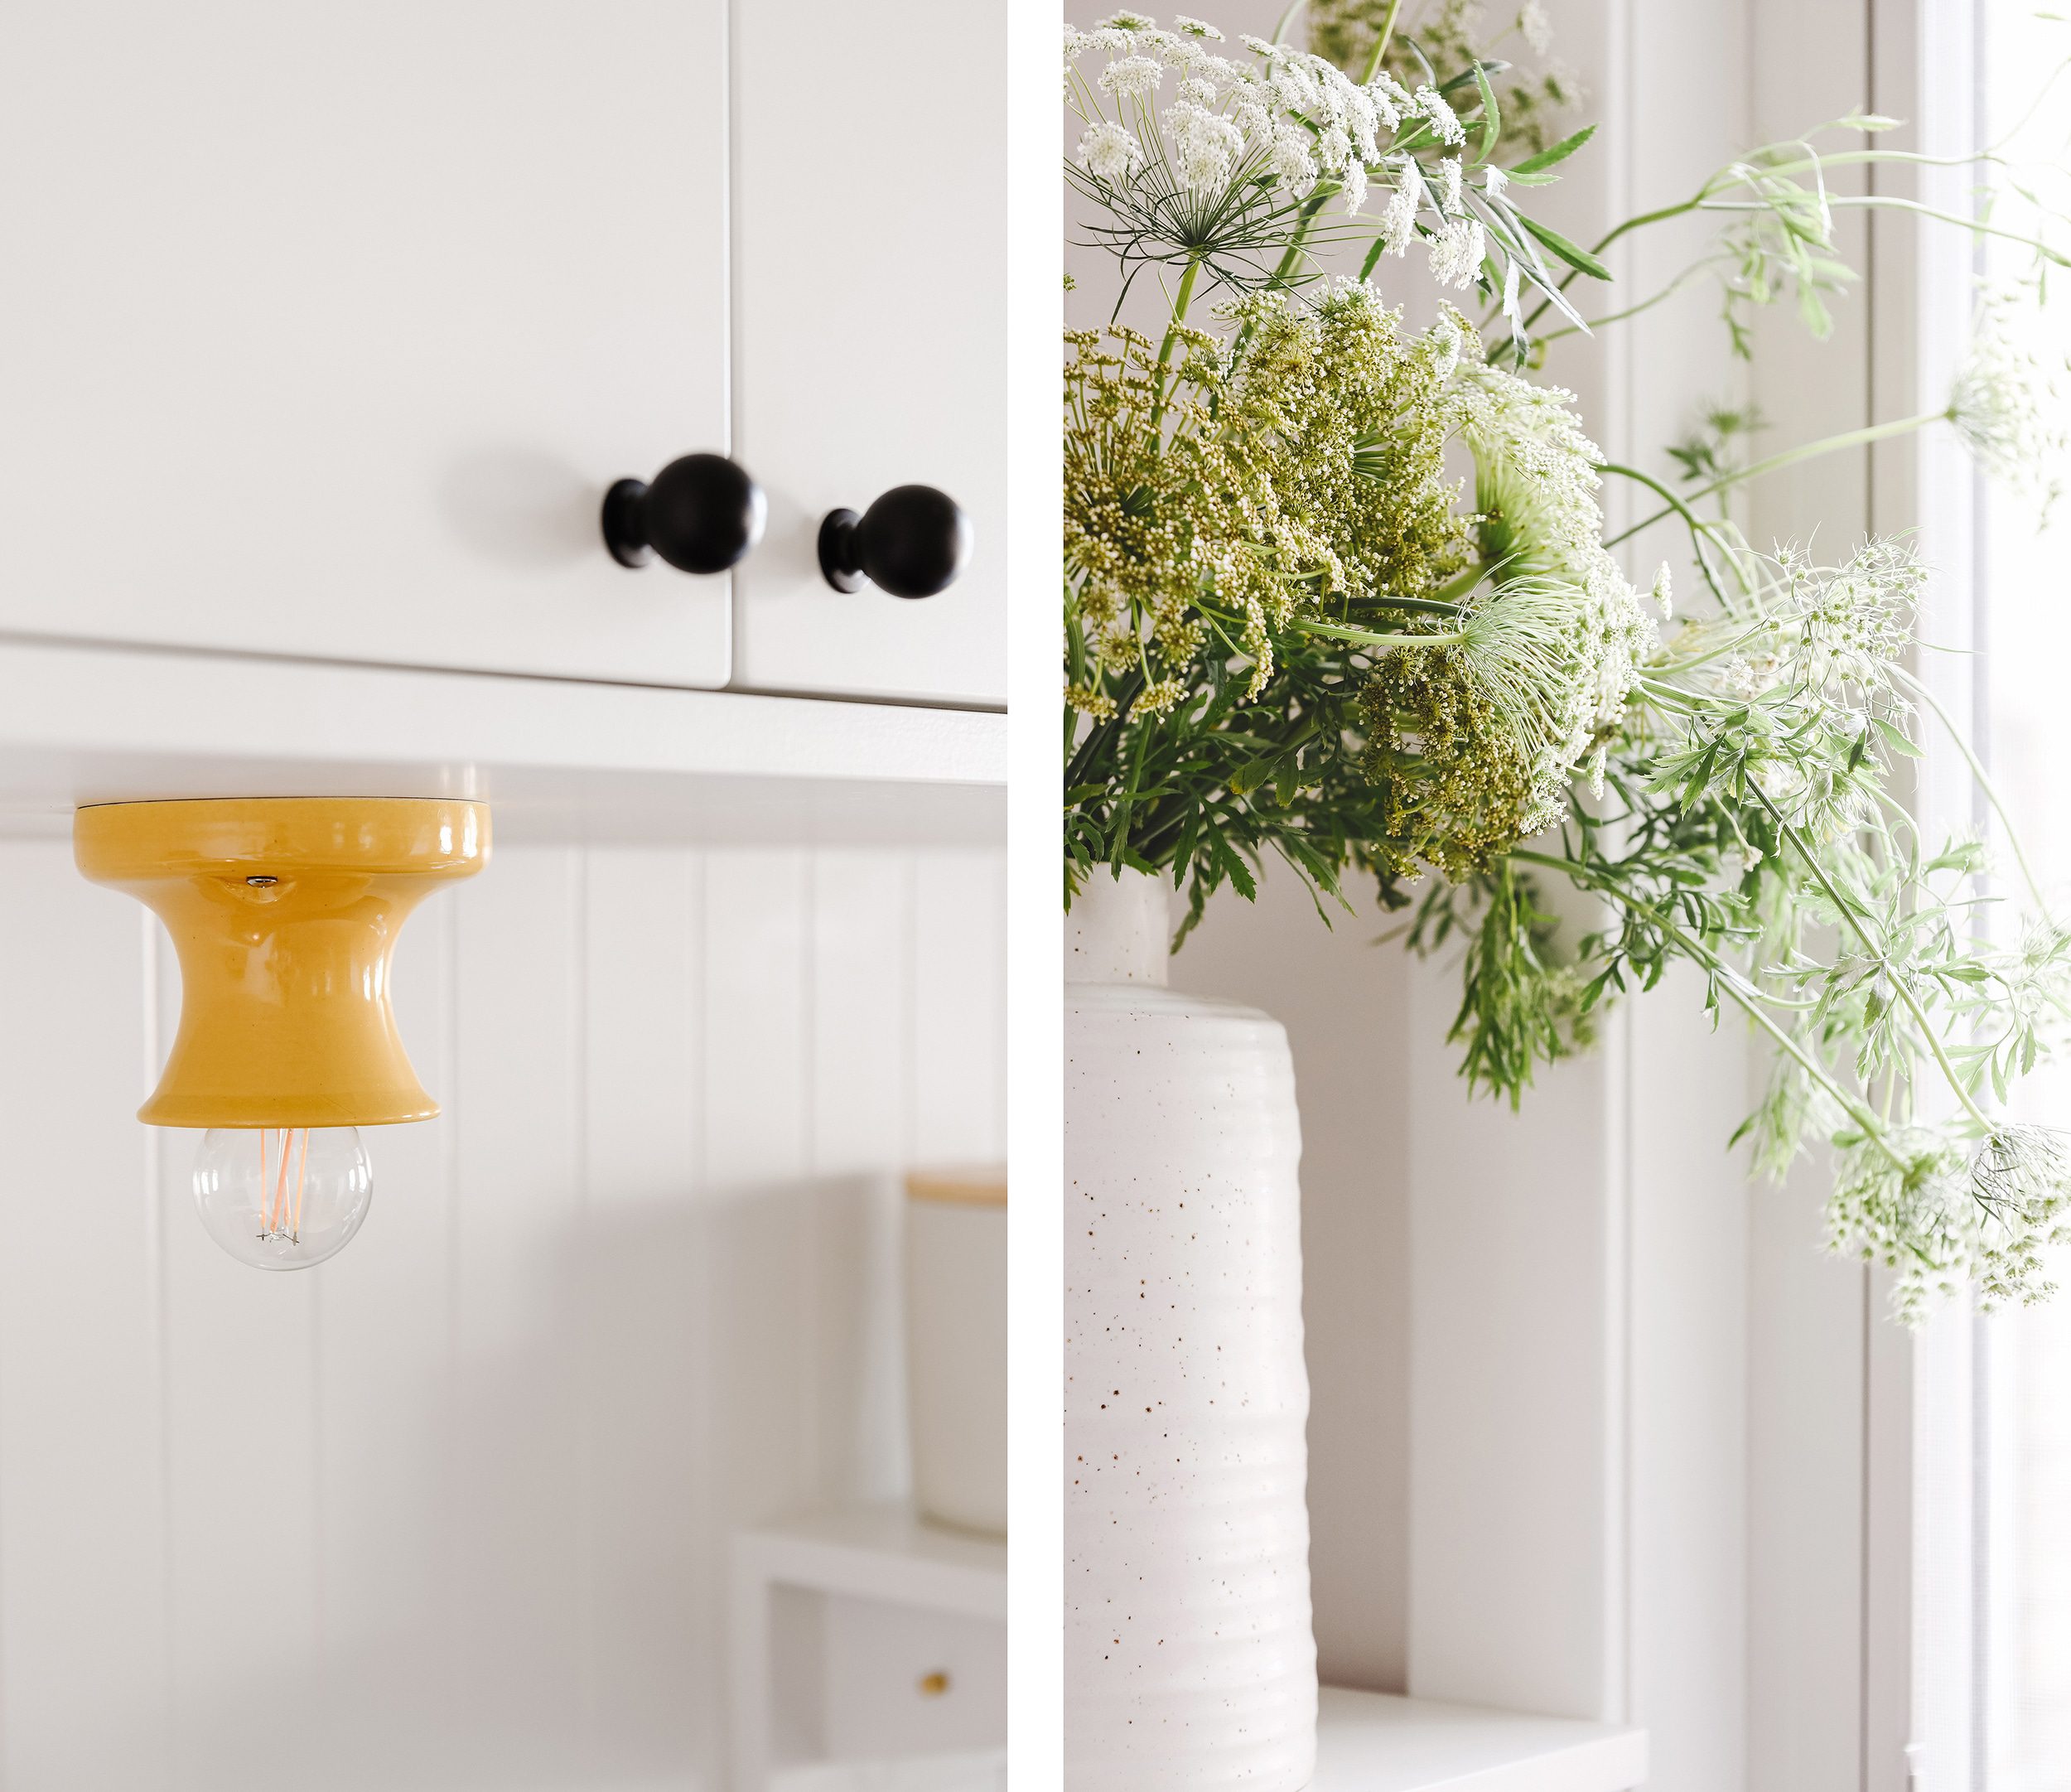 Detail of kitchen sconce and greenery via Yellow Brick Home